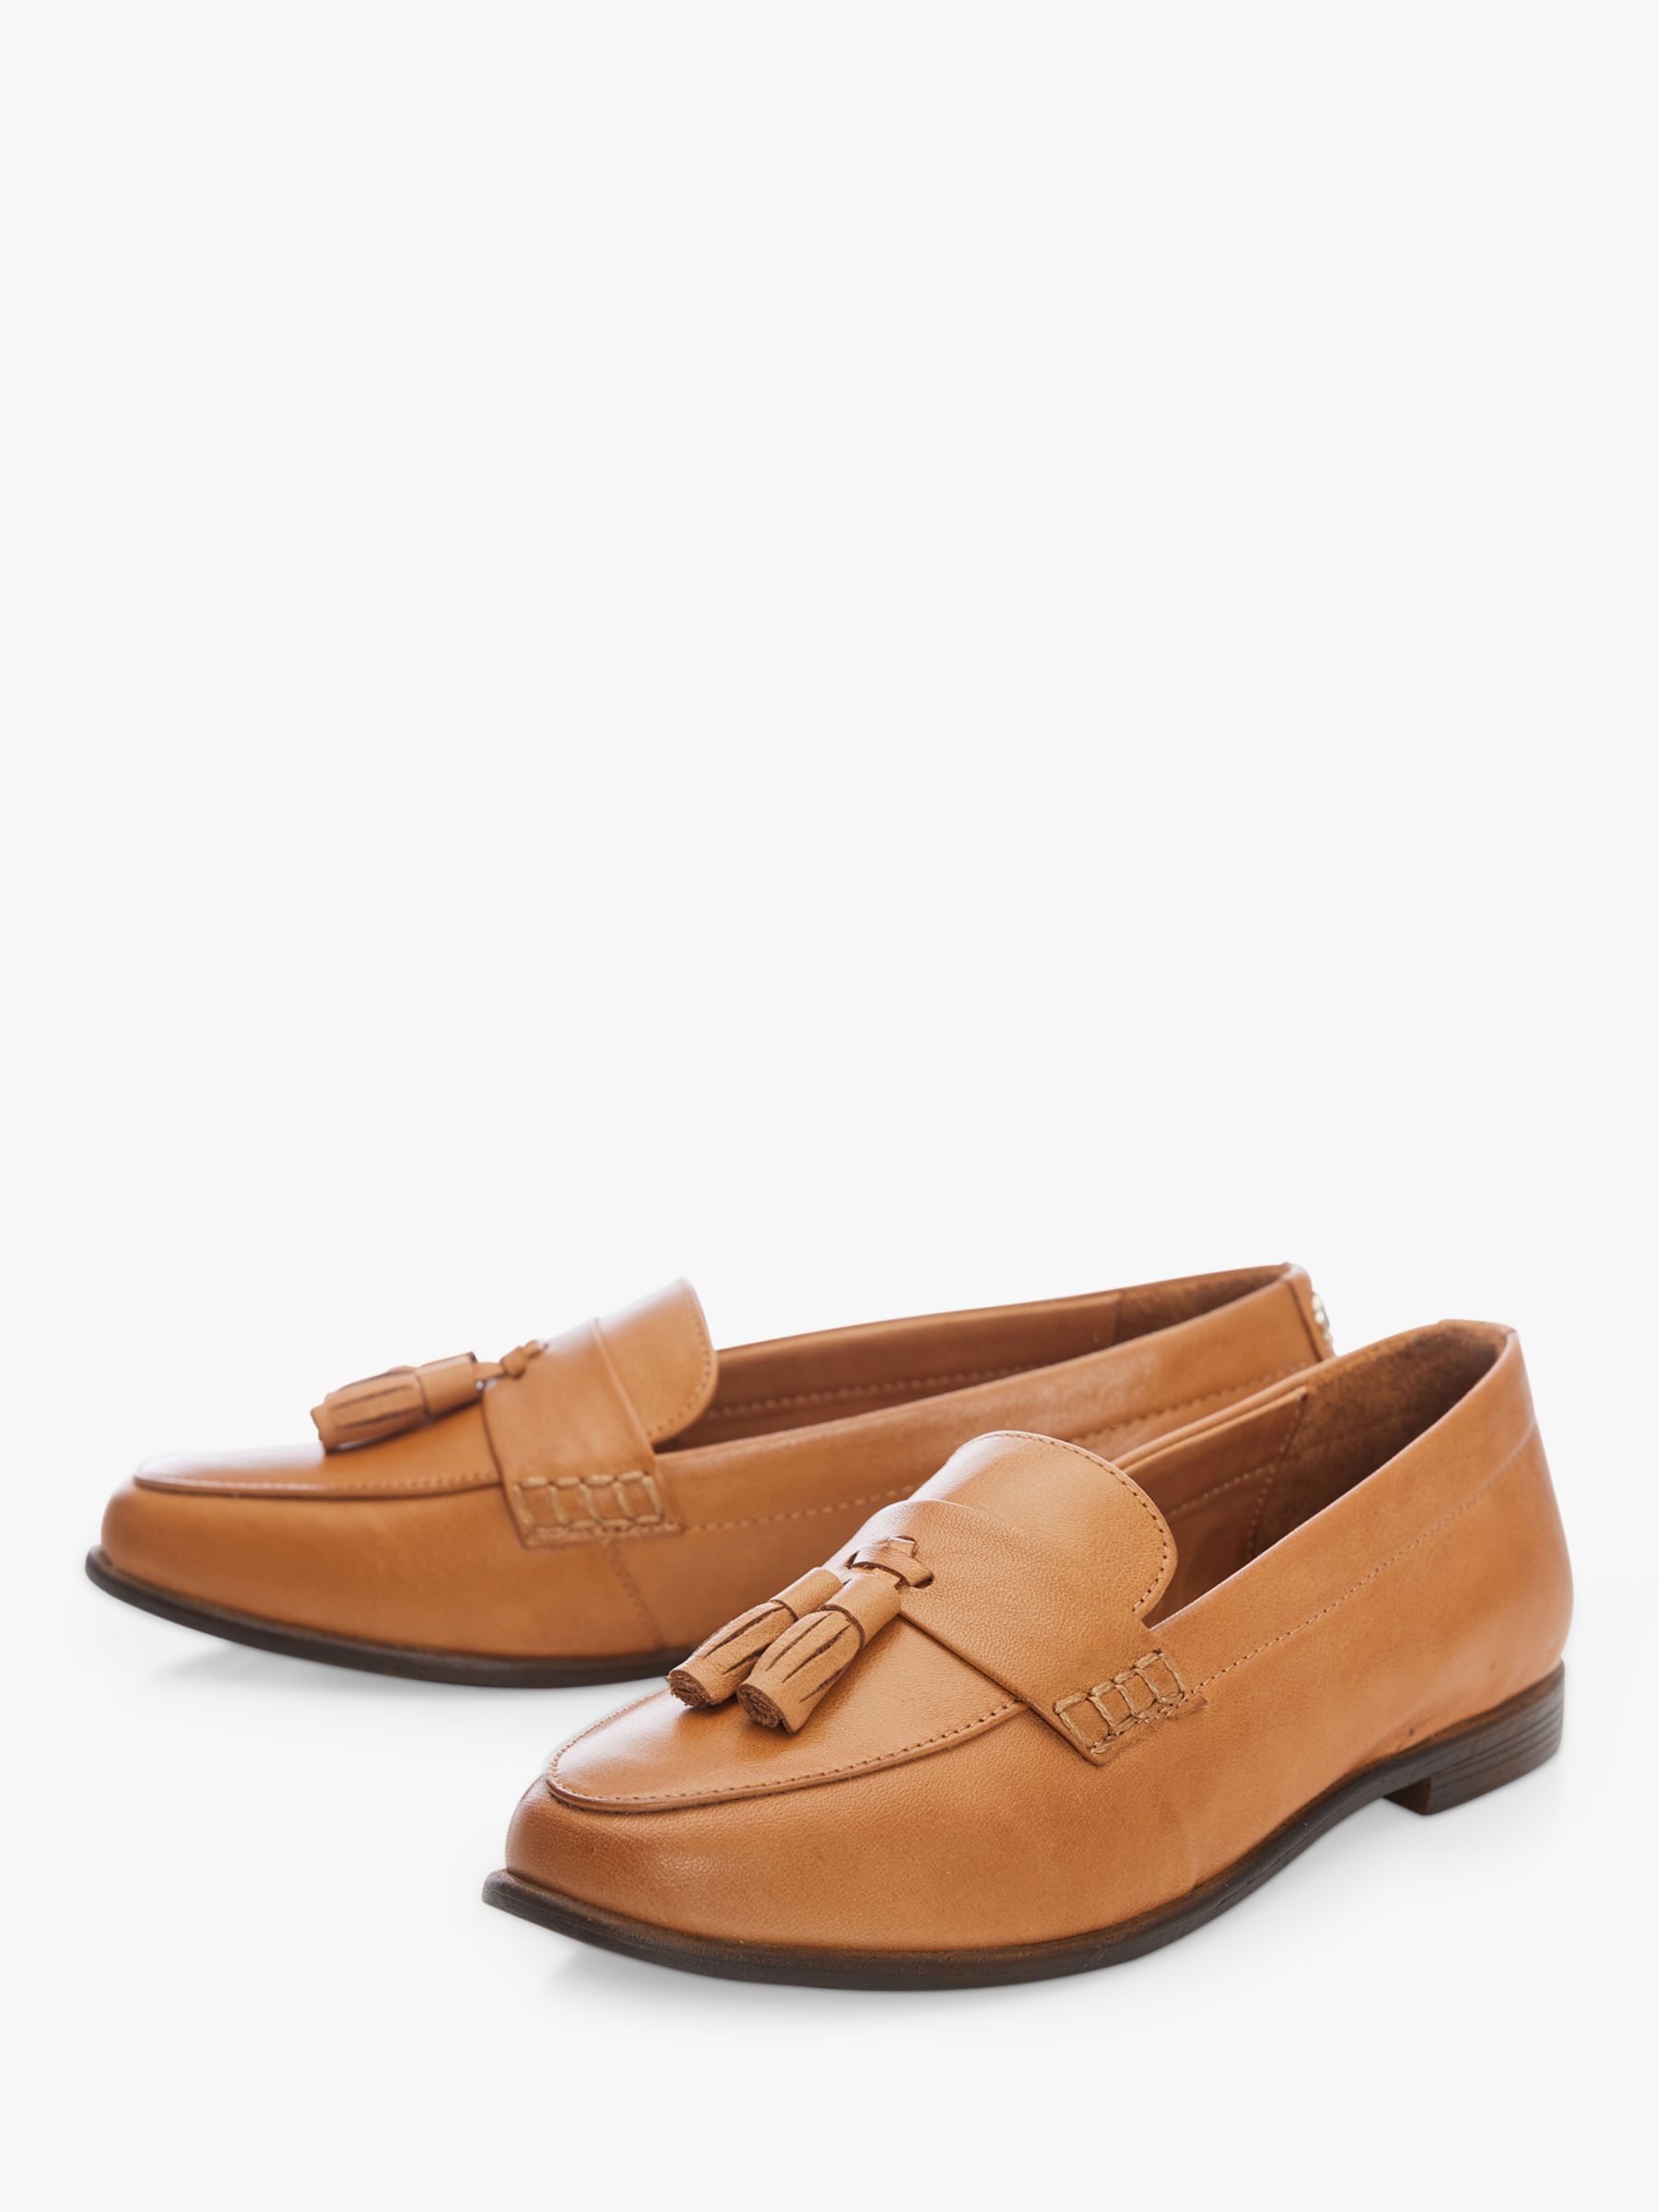 Moda in Pelle Forina Leather Square Toe Loafers, Tan at John Lewis